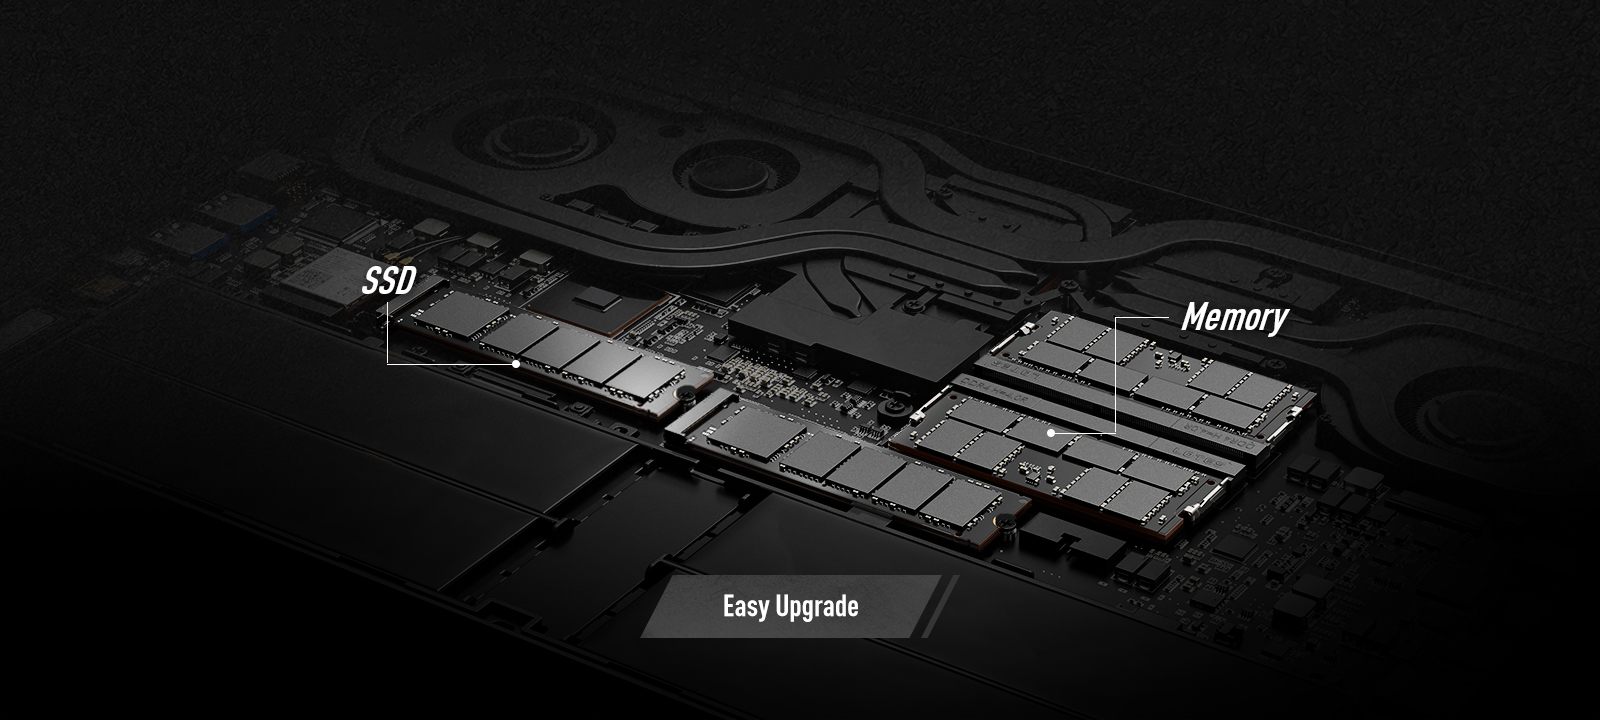 GS66 Stealth's expansion slots: Easy Upgrade memory and SSD.